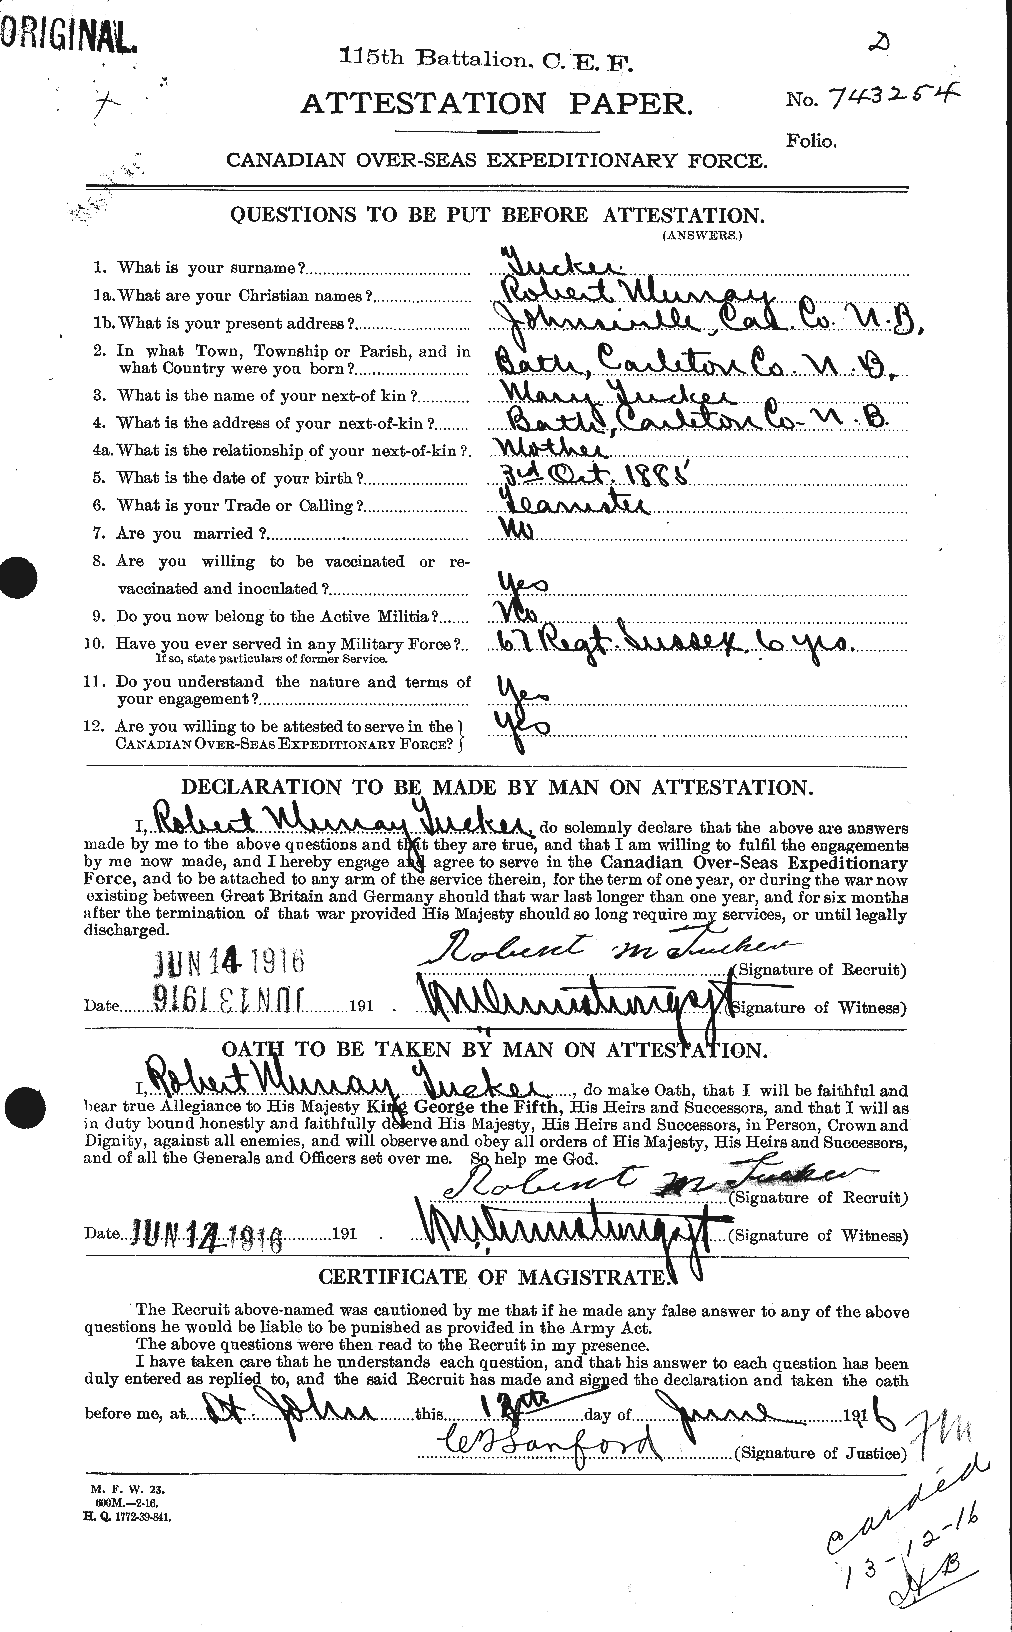 Personnel Records of the First World War - CEF 642826a